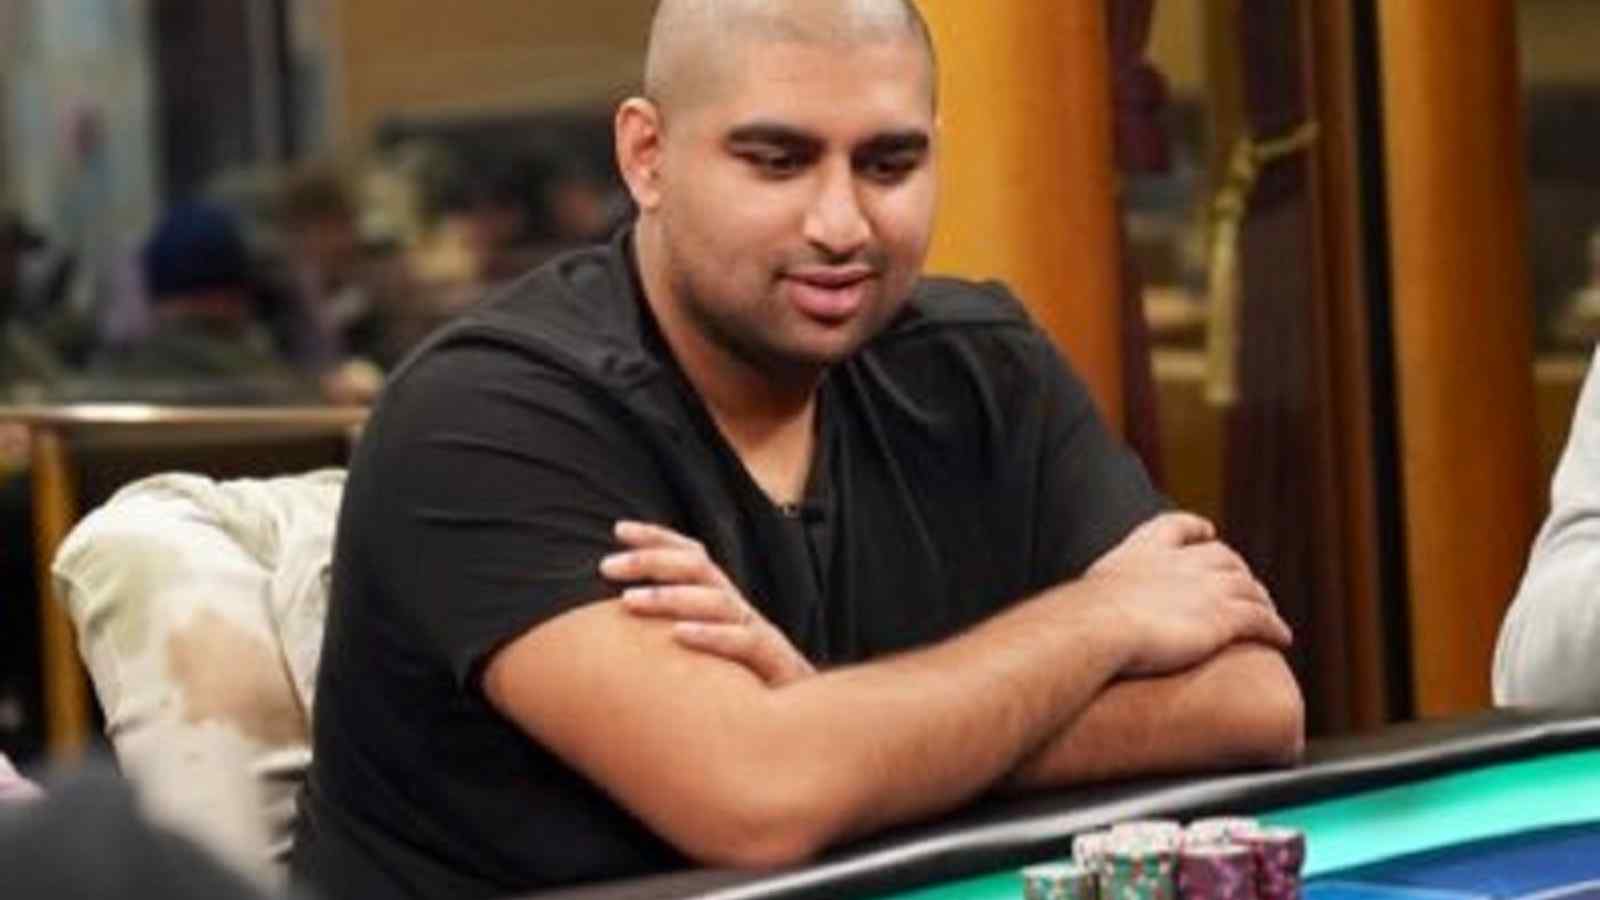 Nik Airball Biography Age, Early Life of Poker Player, Net Worth